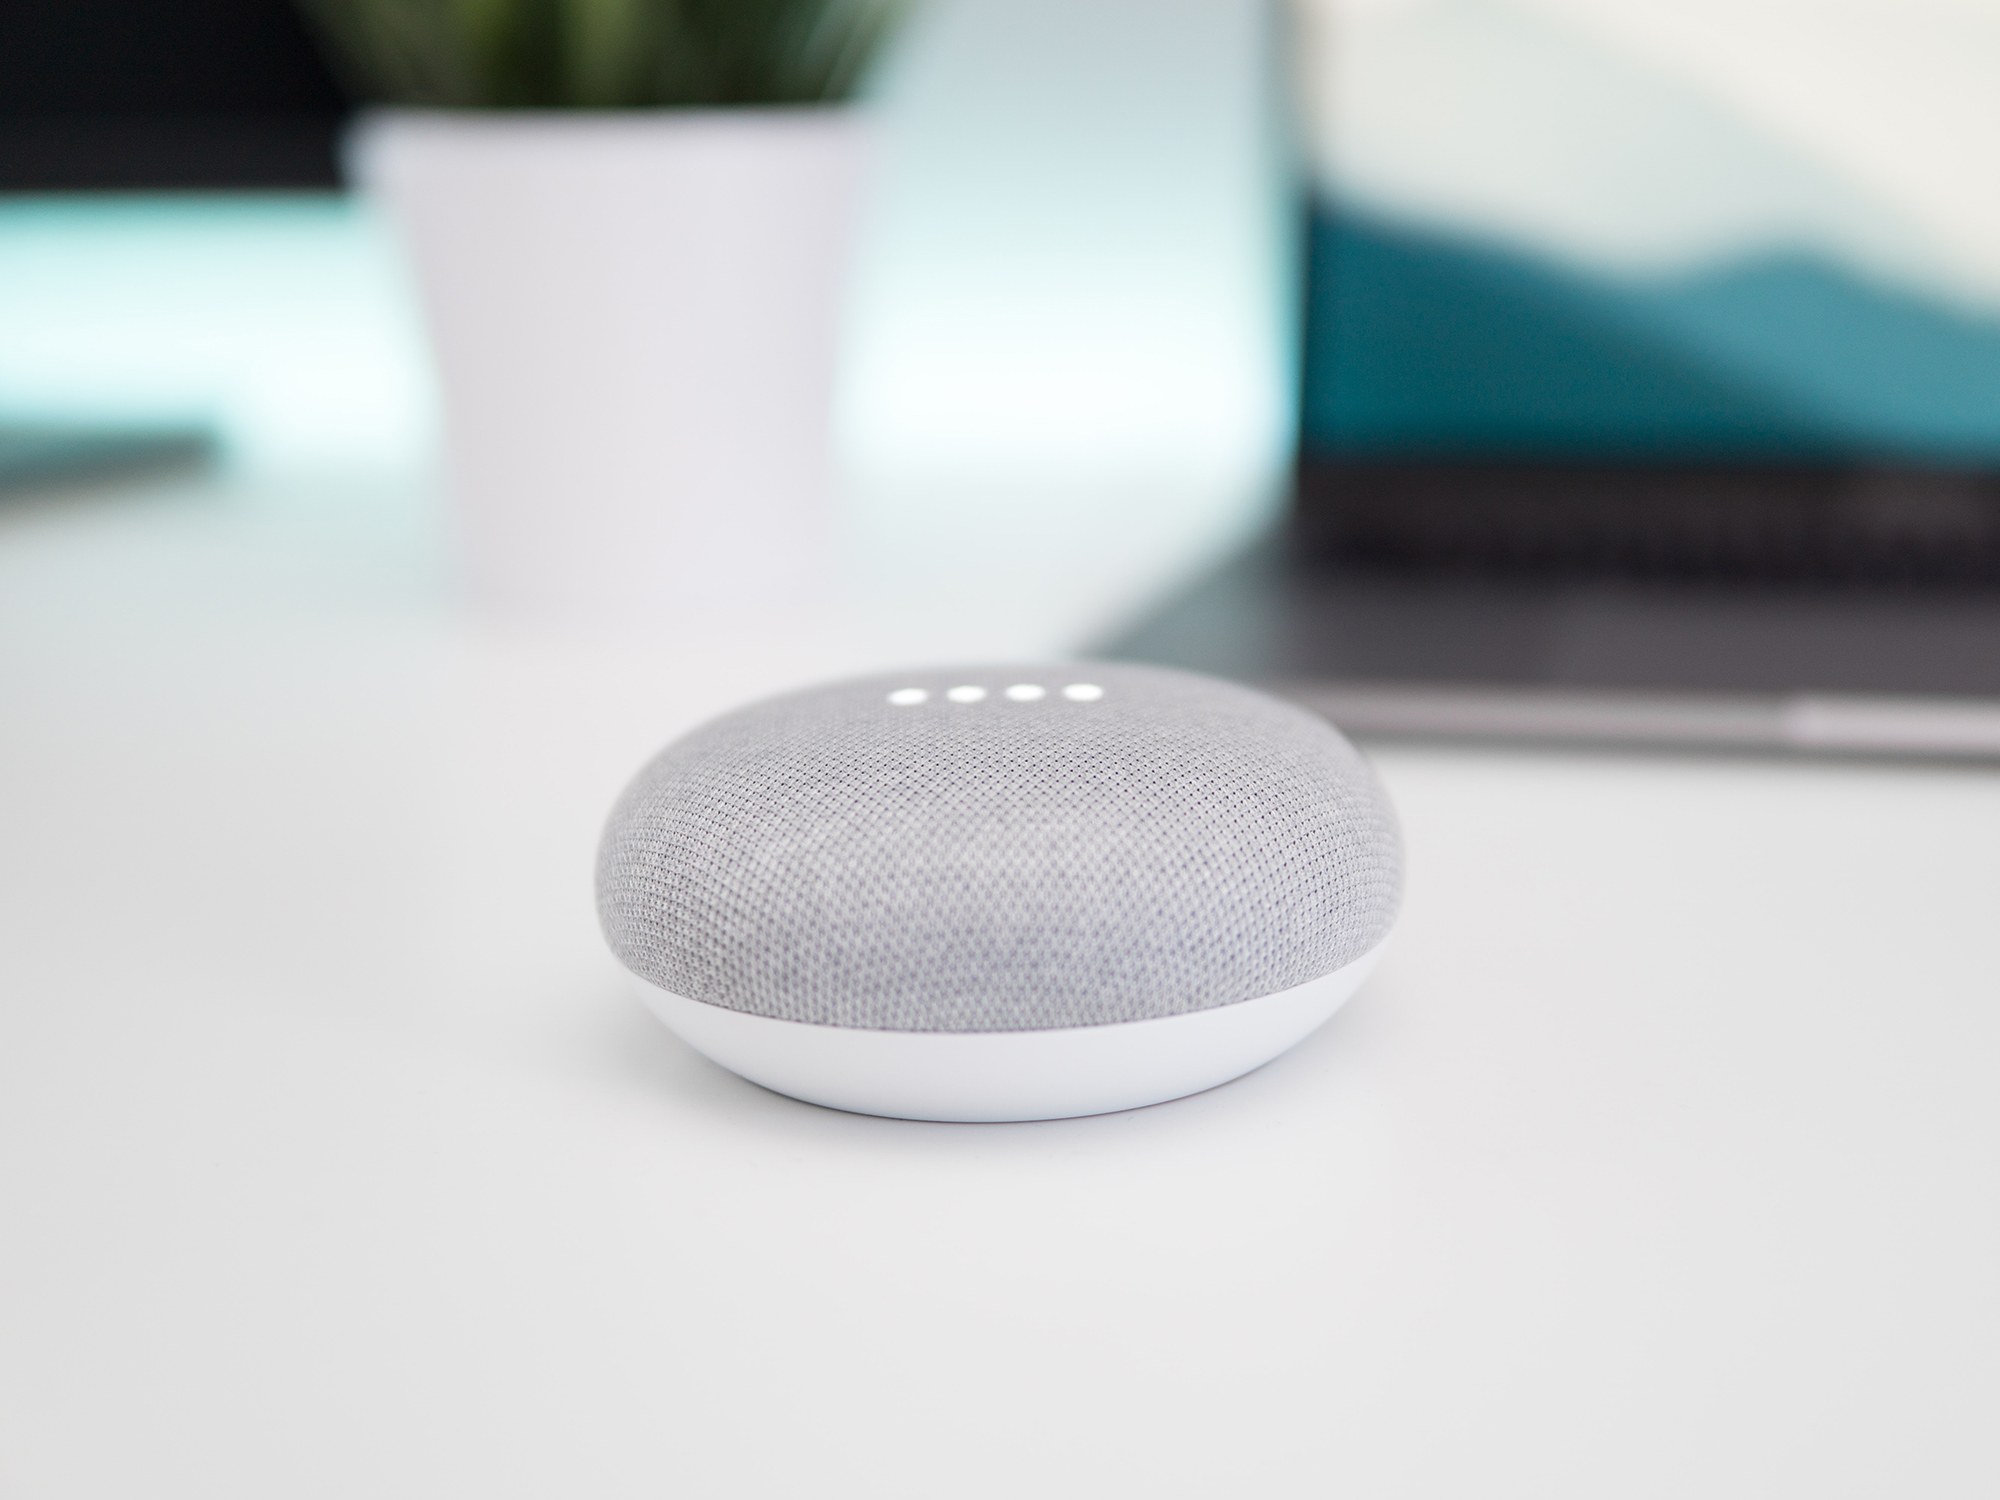 Sync up all your smart home gadgets with Google Home